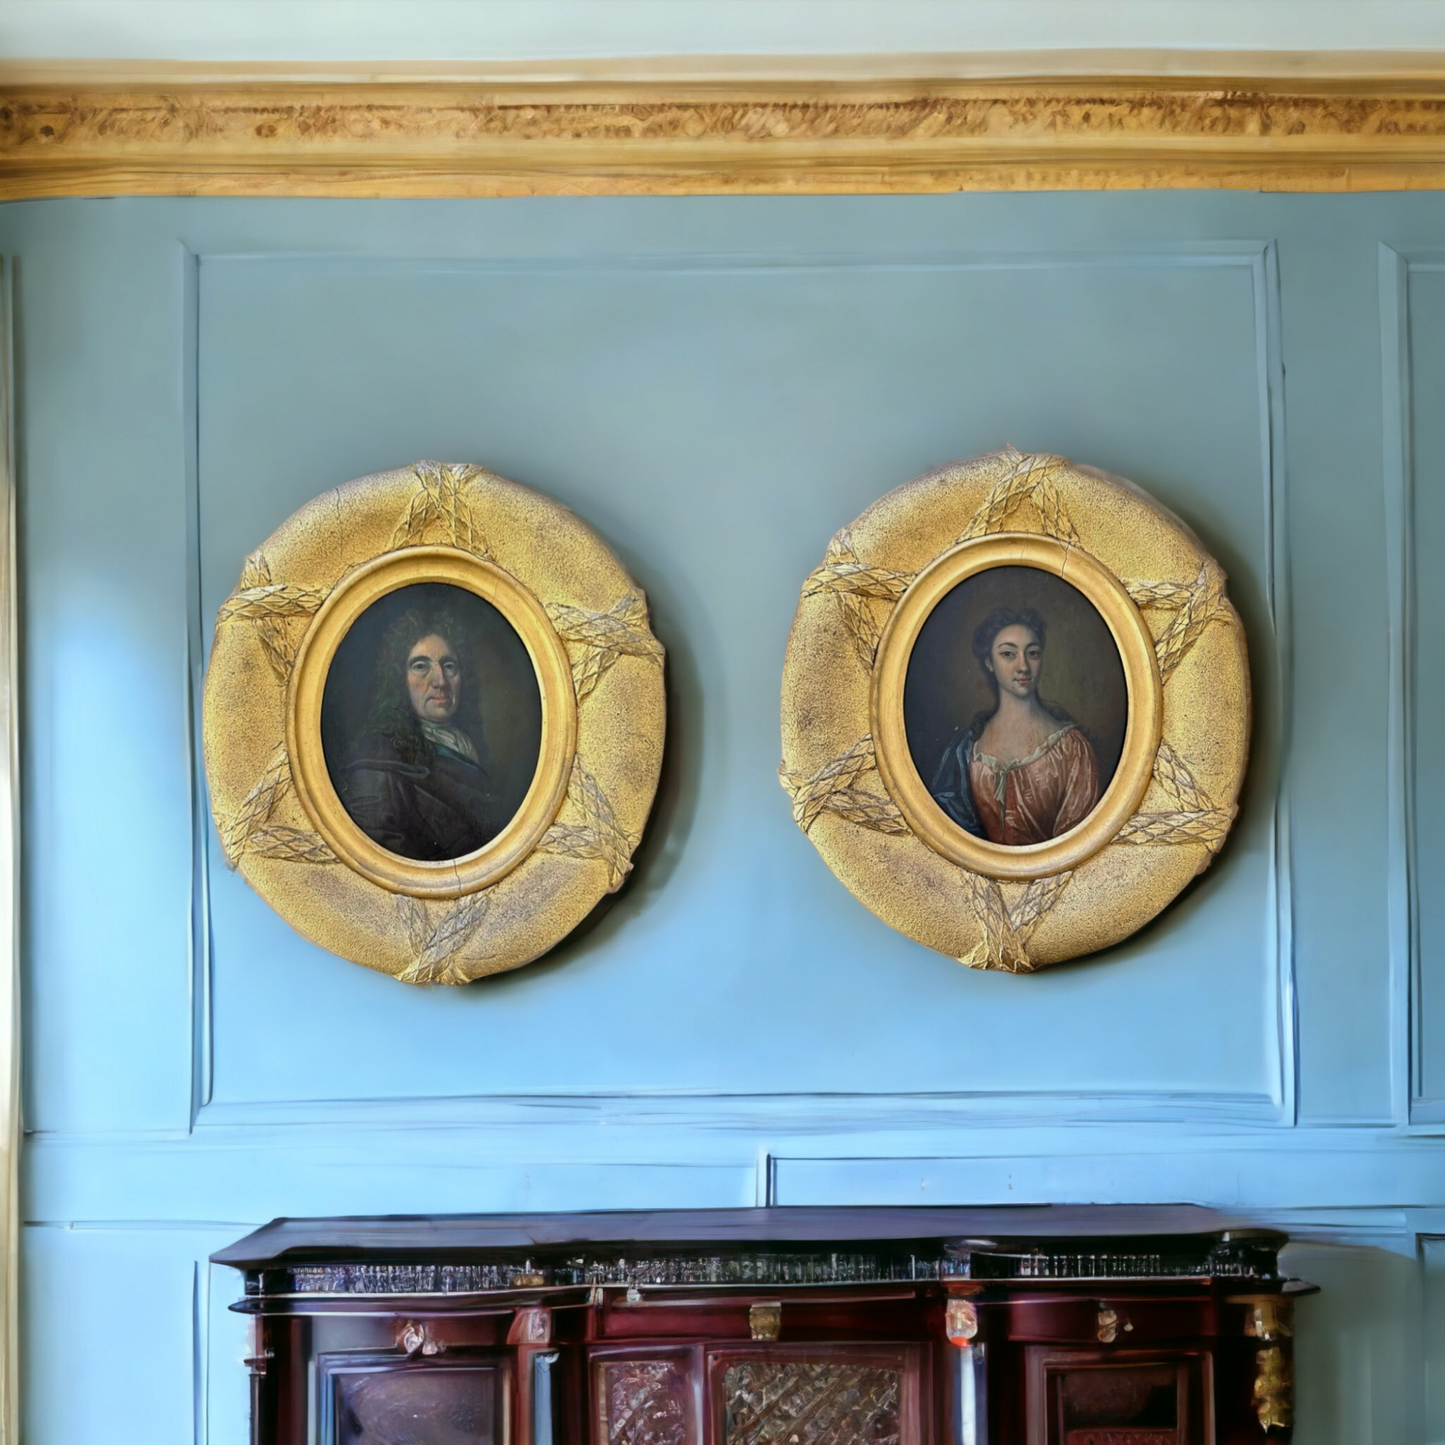 A Fine Pair of Early 18th Century English School Portraits Dated 1714